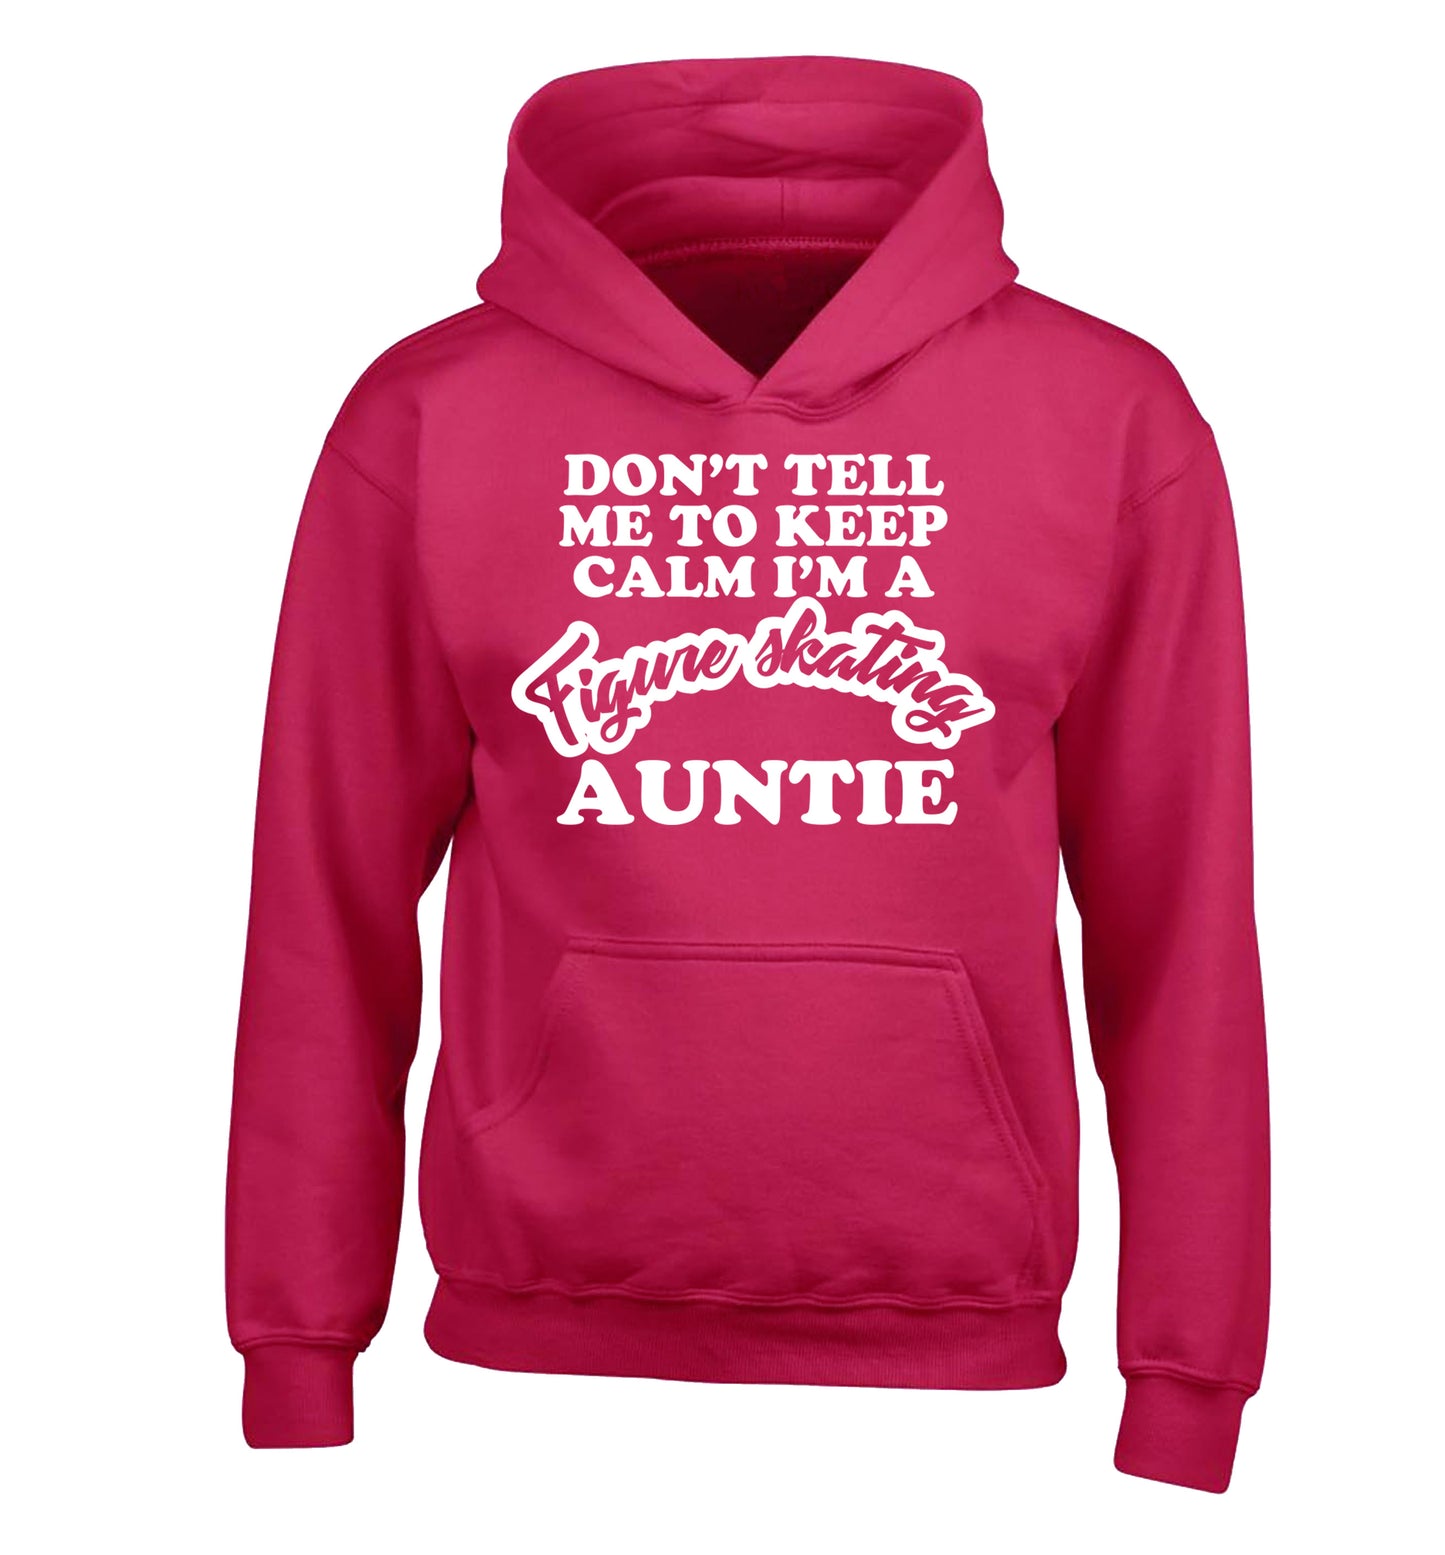 Don't tell me to keep calm I'm a figure skating auntie children's pink hoodie 12-14 Years